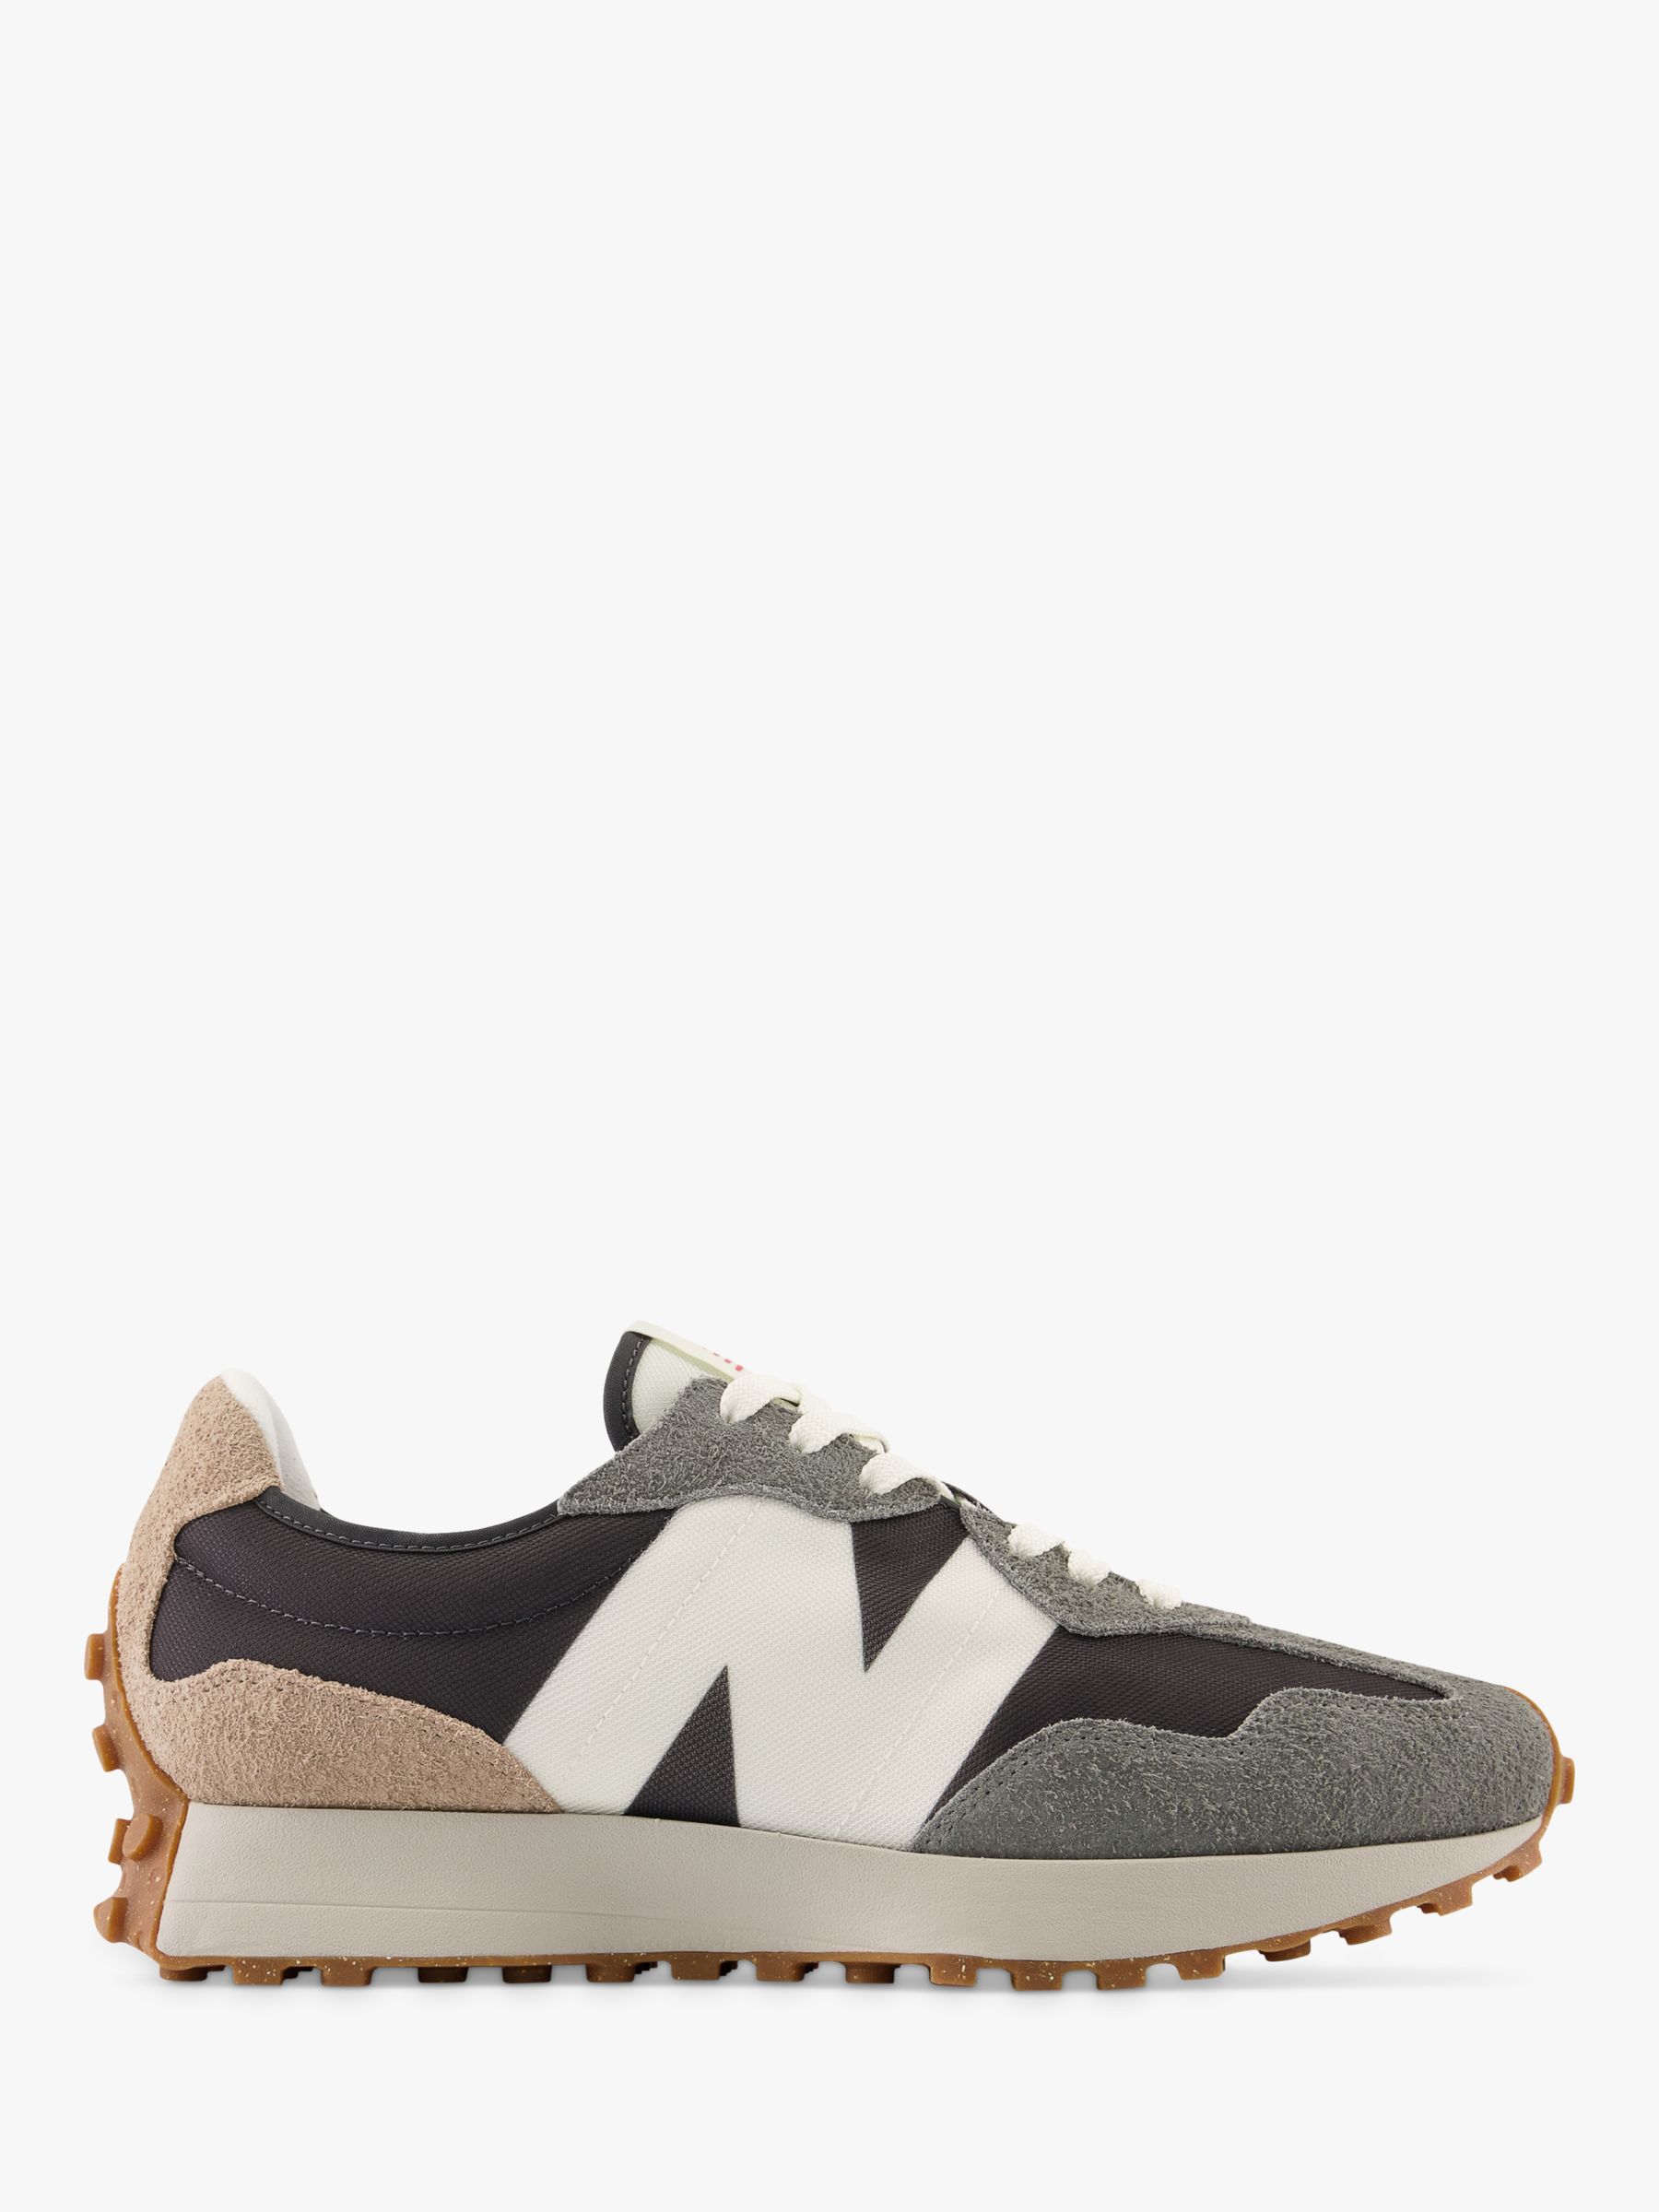 New Balance 327 Retro Suede Trainers, Harbour Grey at John Lewis & Partners